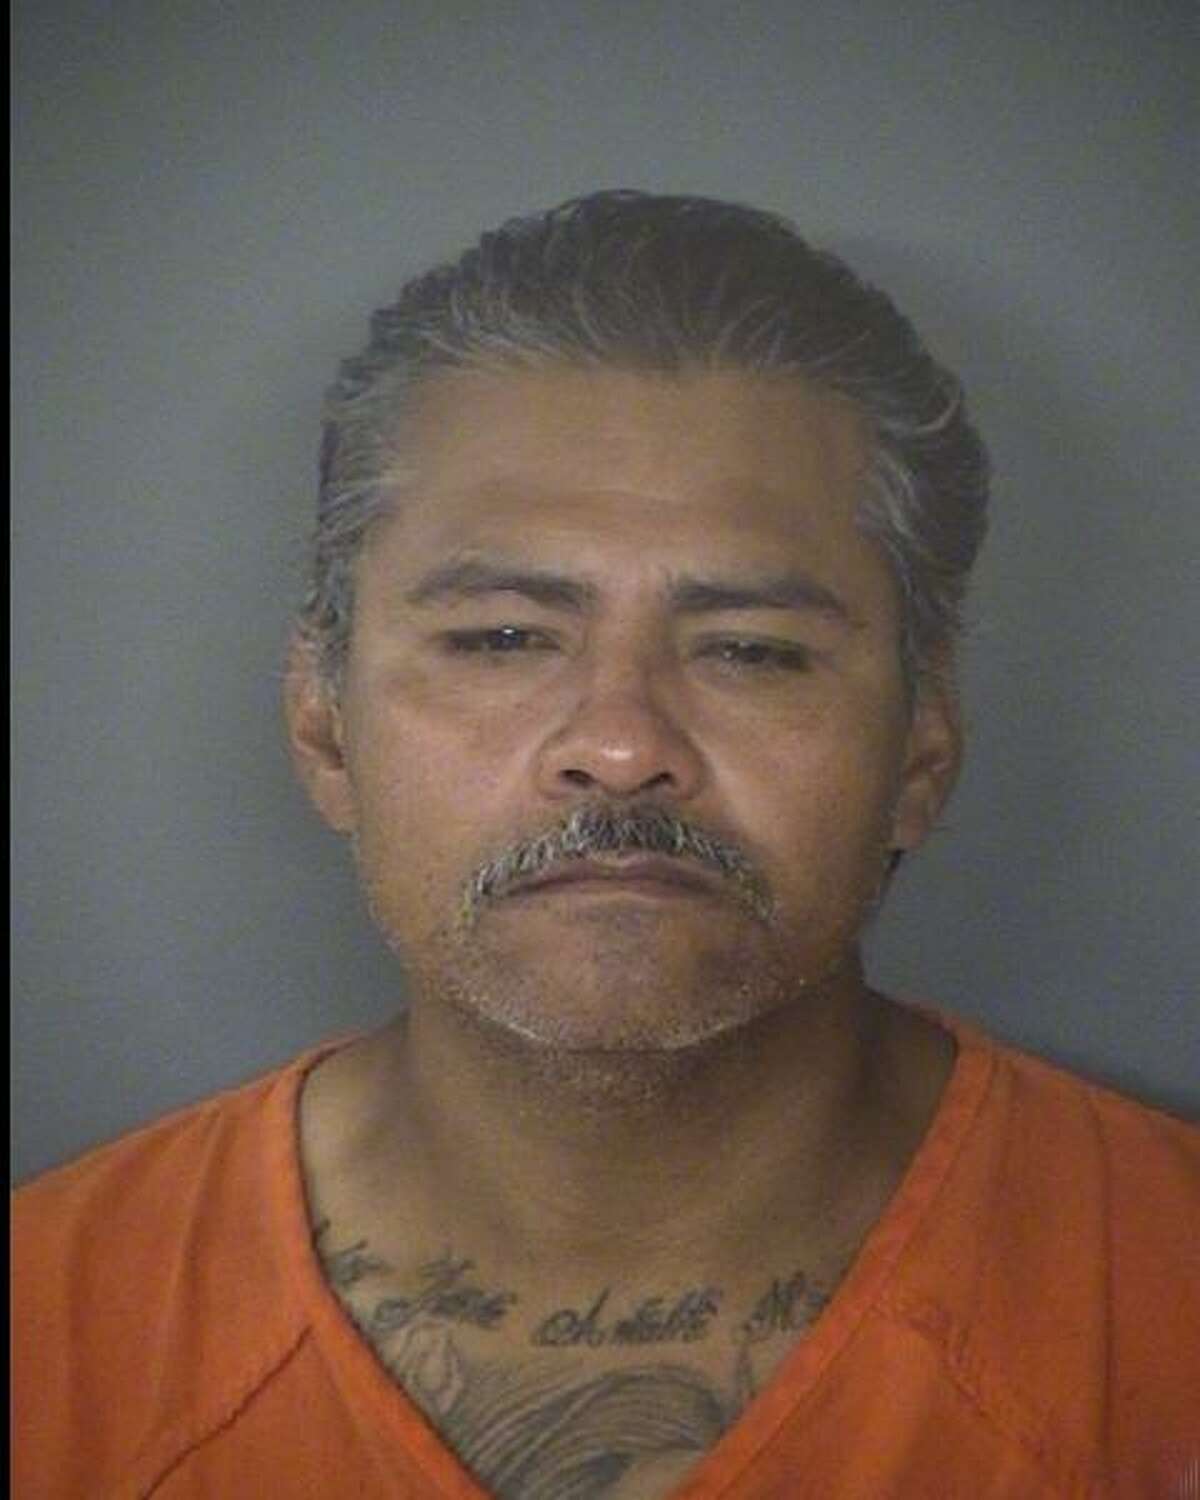 Moises Morales, 45, agreed to plead guilty to murder in the fatal shooting of Vincent Fisher, 31, in exchange for the sentence